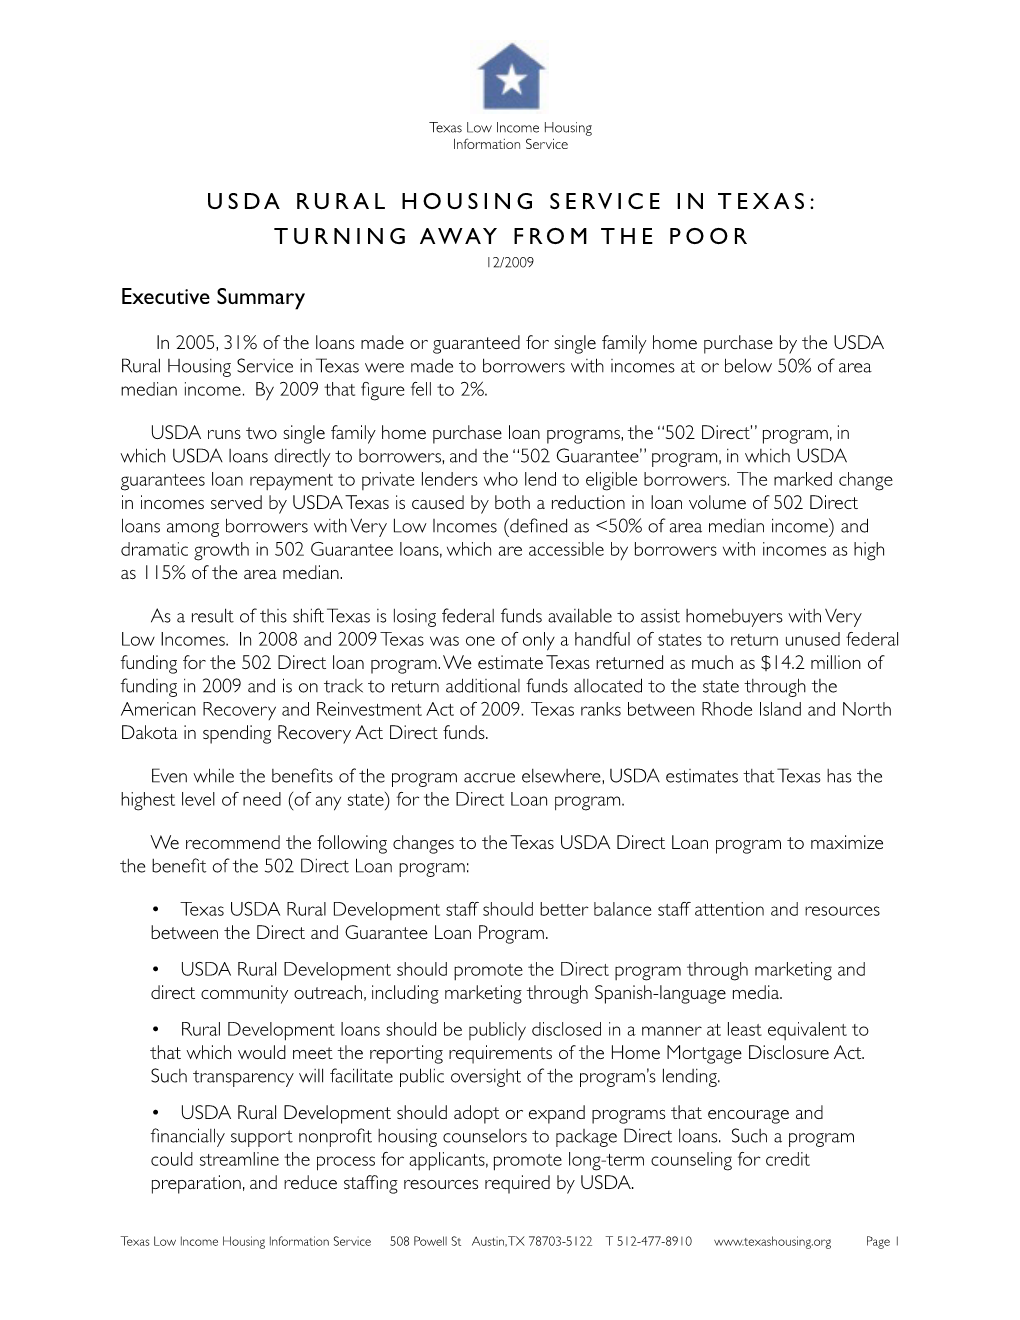 USDA RURAL HOUSING SERVICE in TEXAS: TURNING AWAY from the POOR 12/2009 Executive Summary